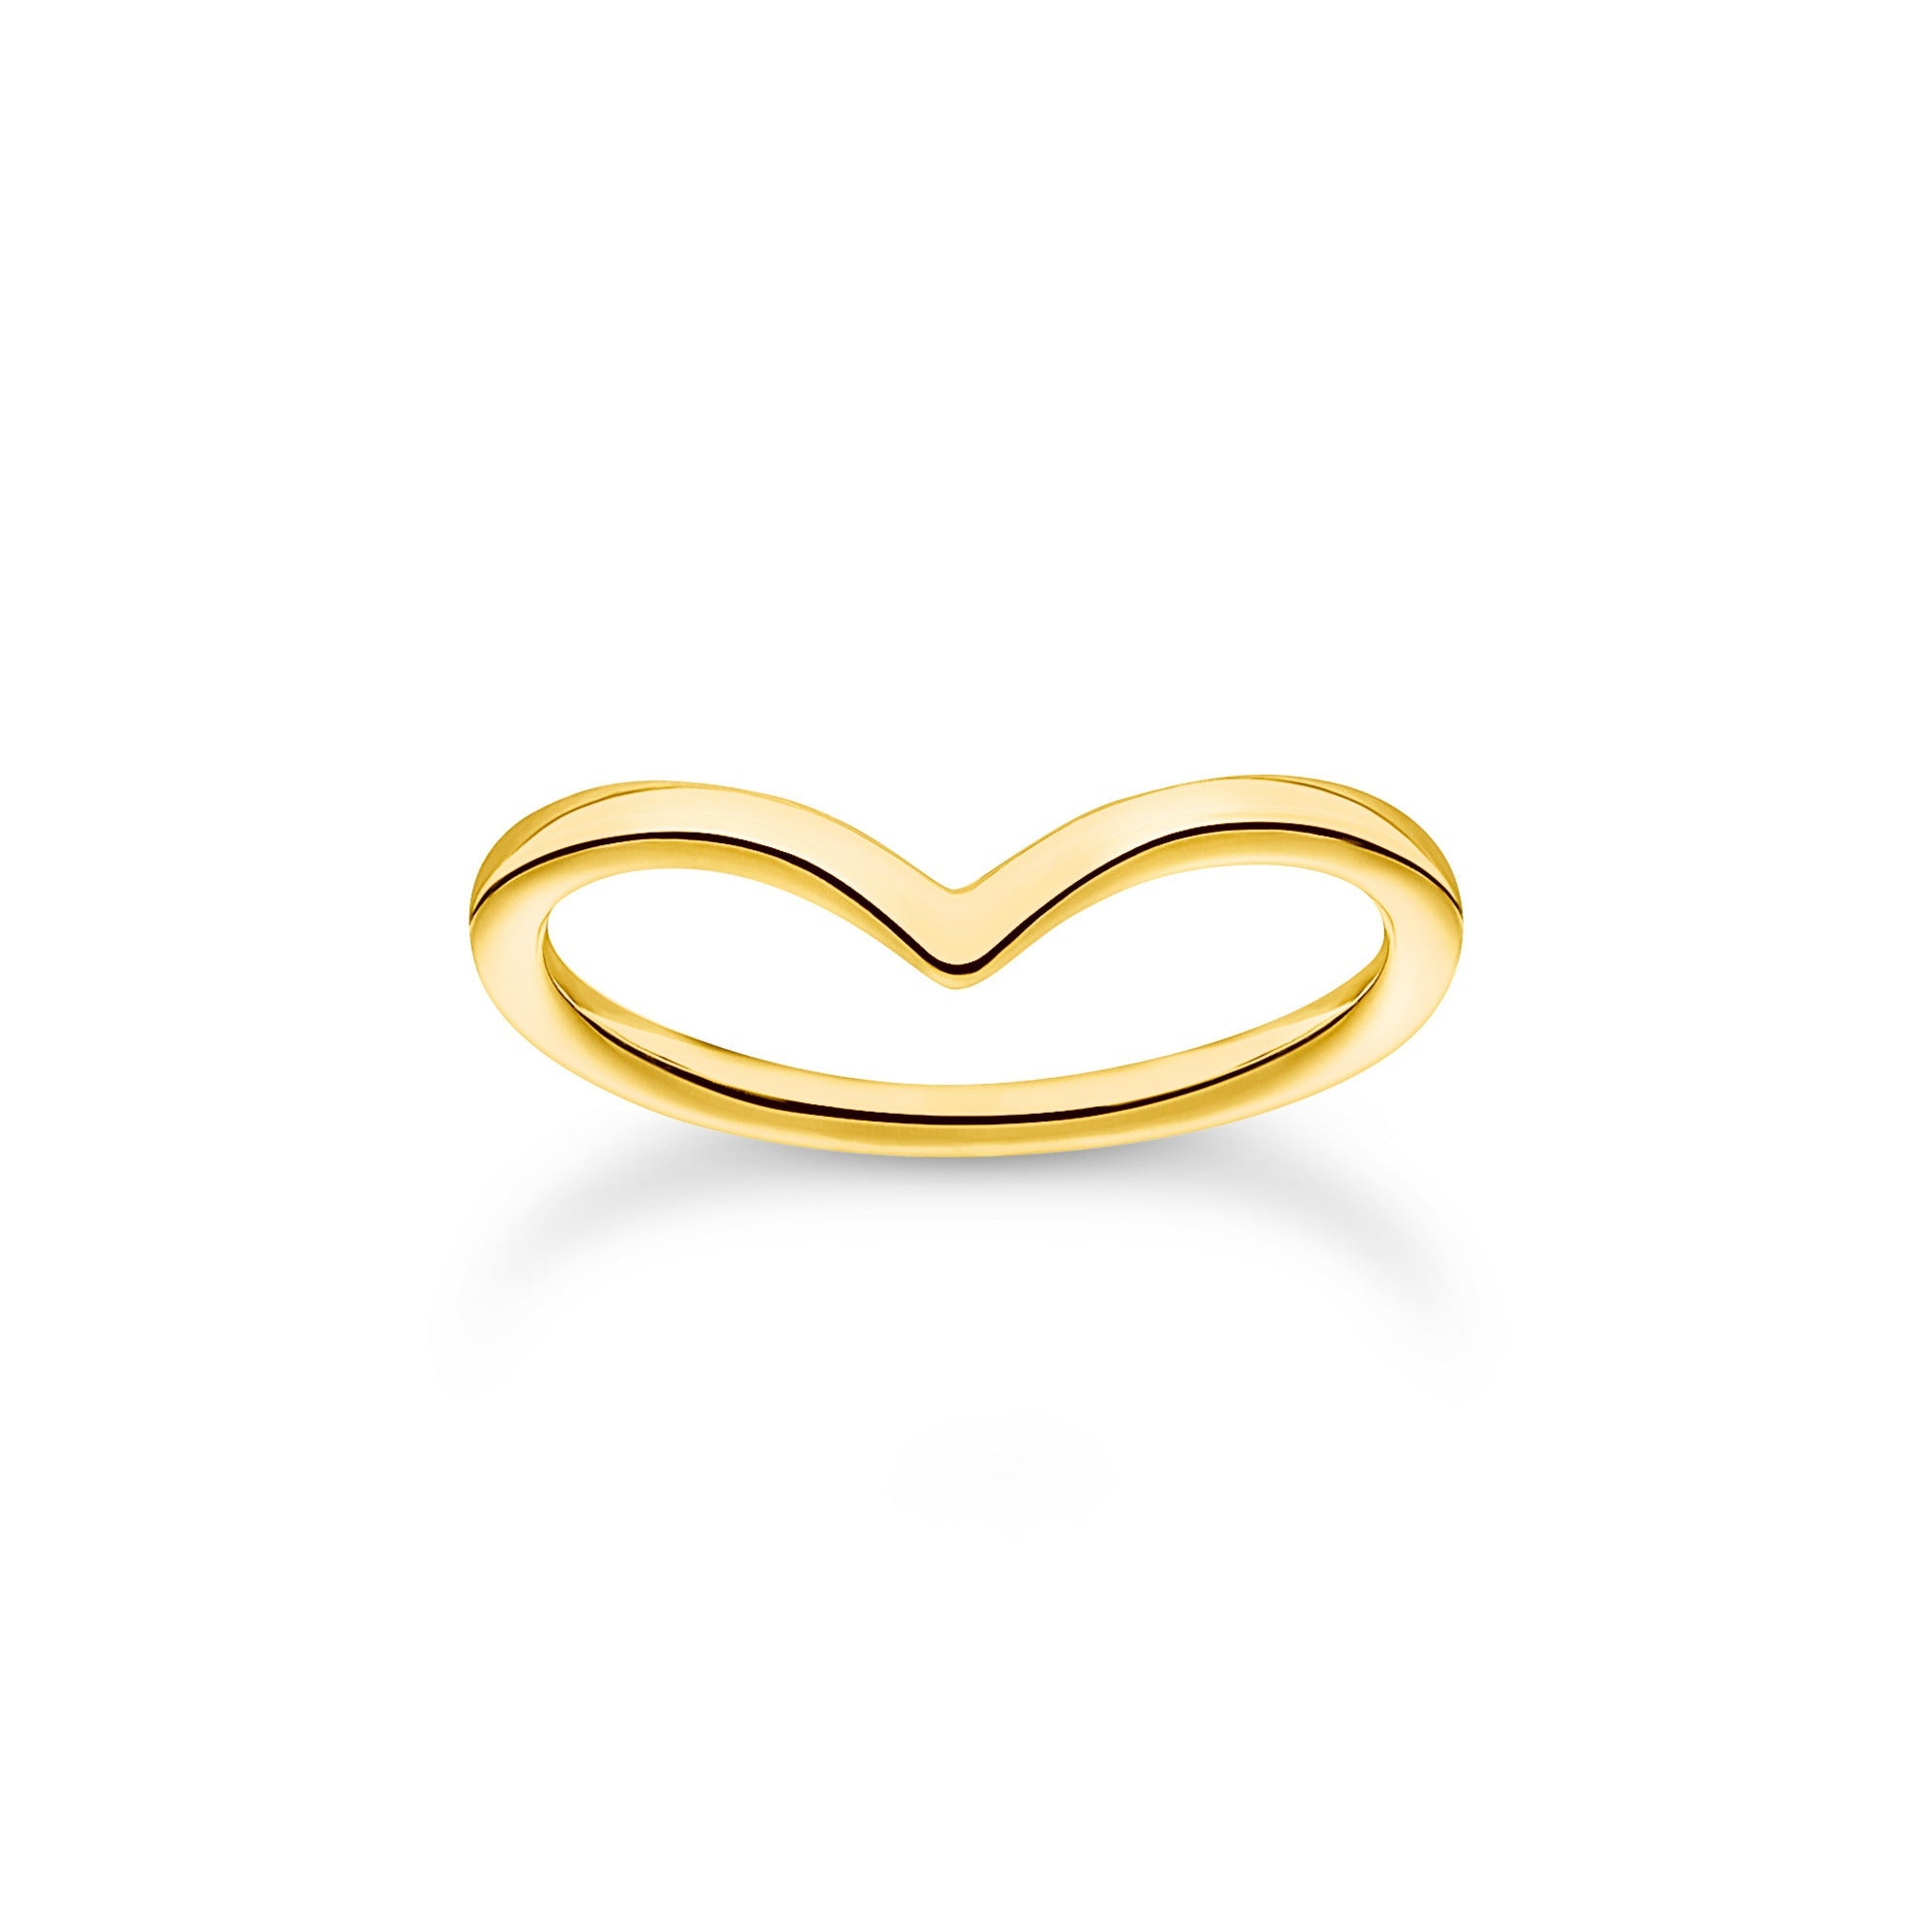 Thomas Sabo Yellow Gold Plated Sterling Silver V-Shape Ring